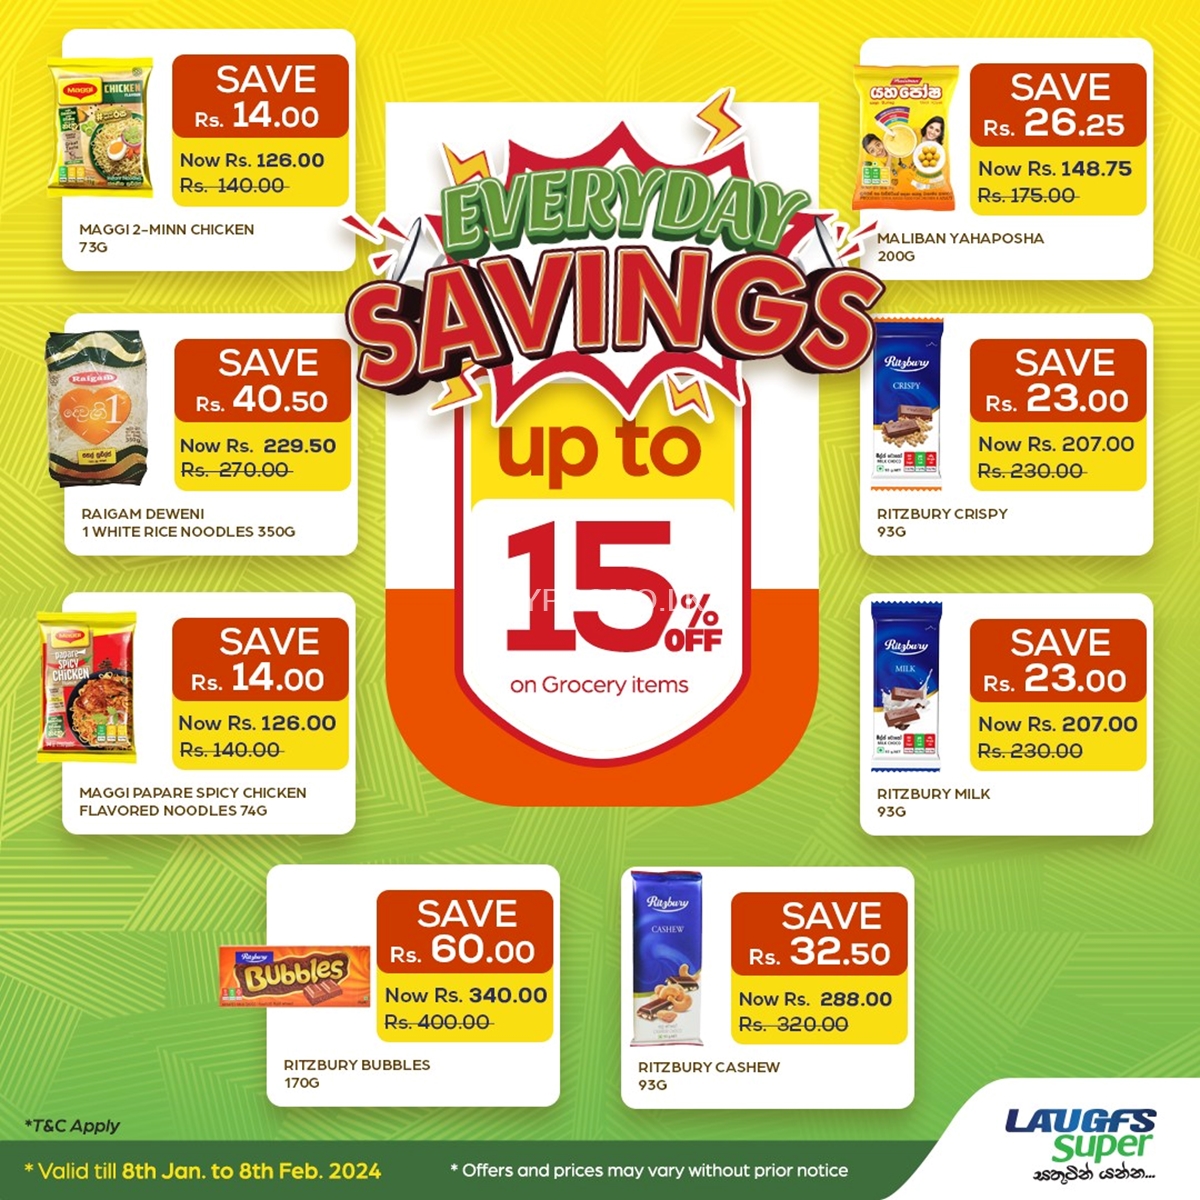 Up to 15% off on Grocery Items at LAUGFS Supermarket